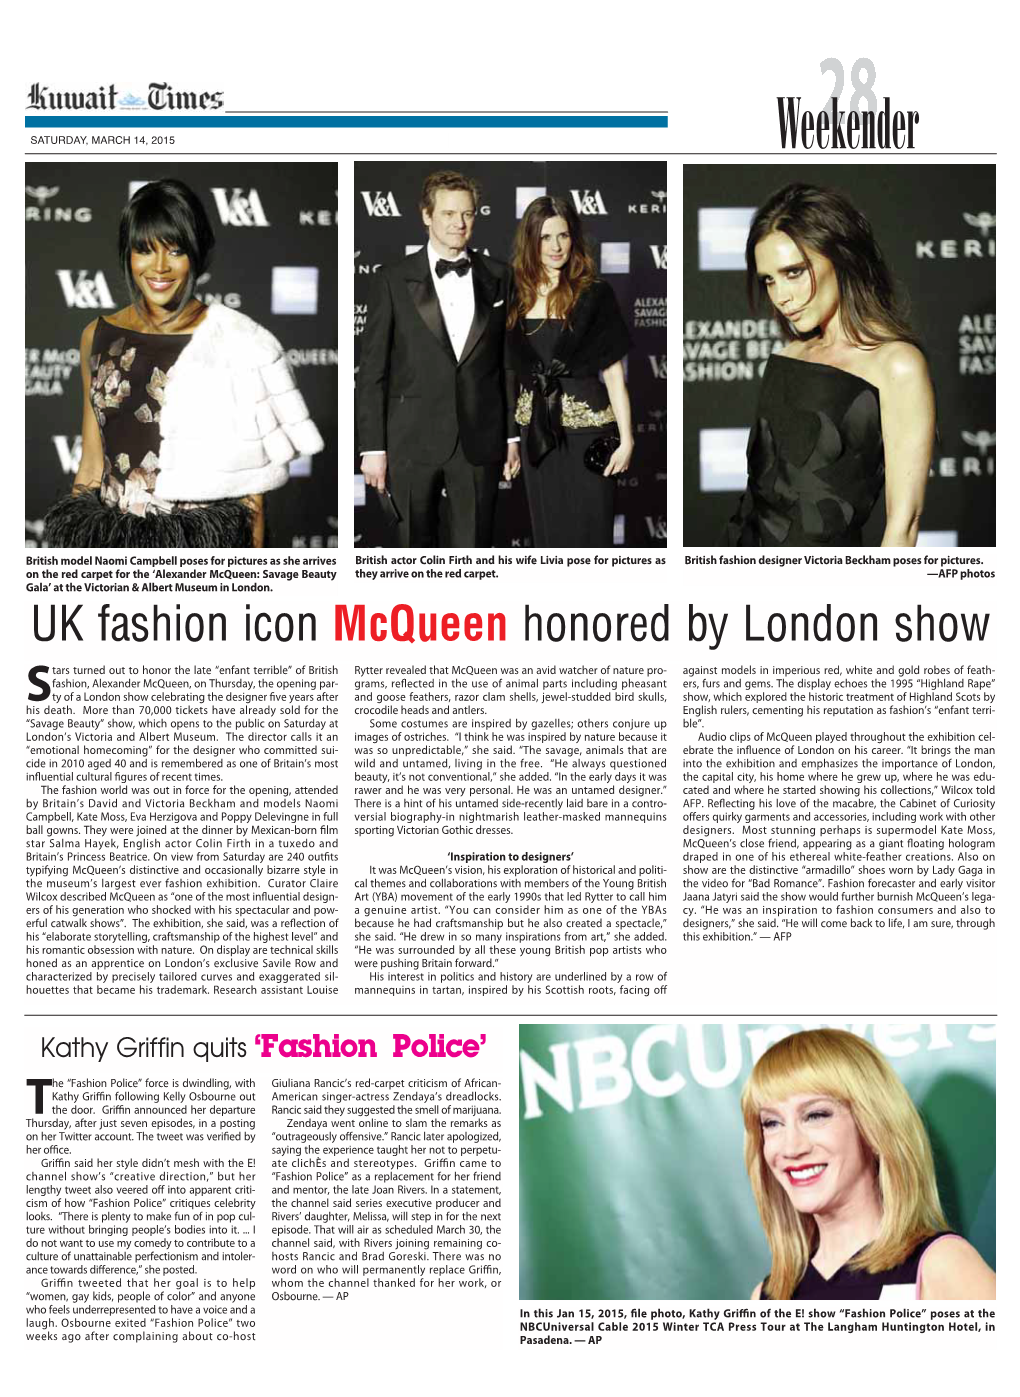 UK Fashion Icon Mcqueen Honored by London Show